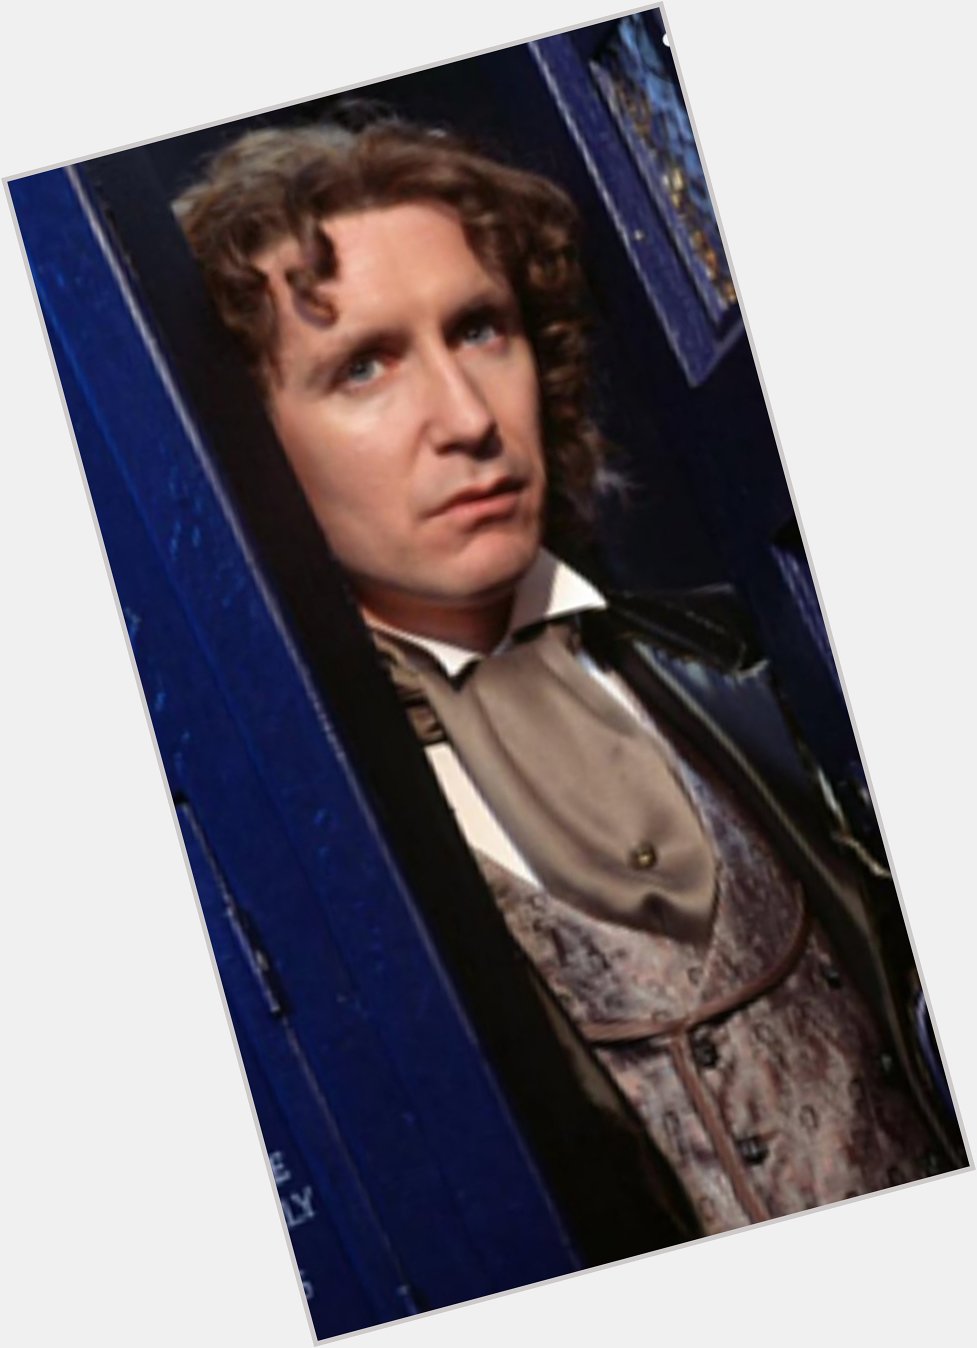 A very happy birthday to Paul Mcgann he is still going strong. 